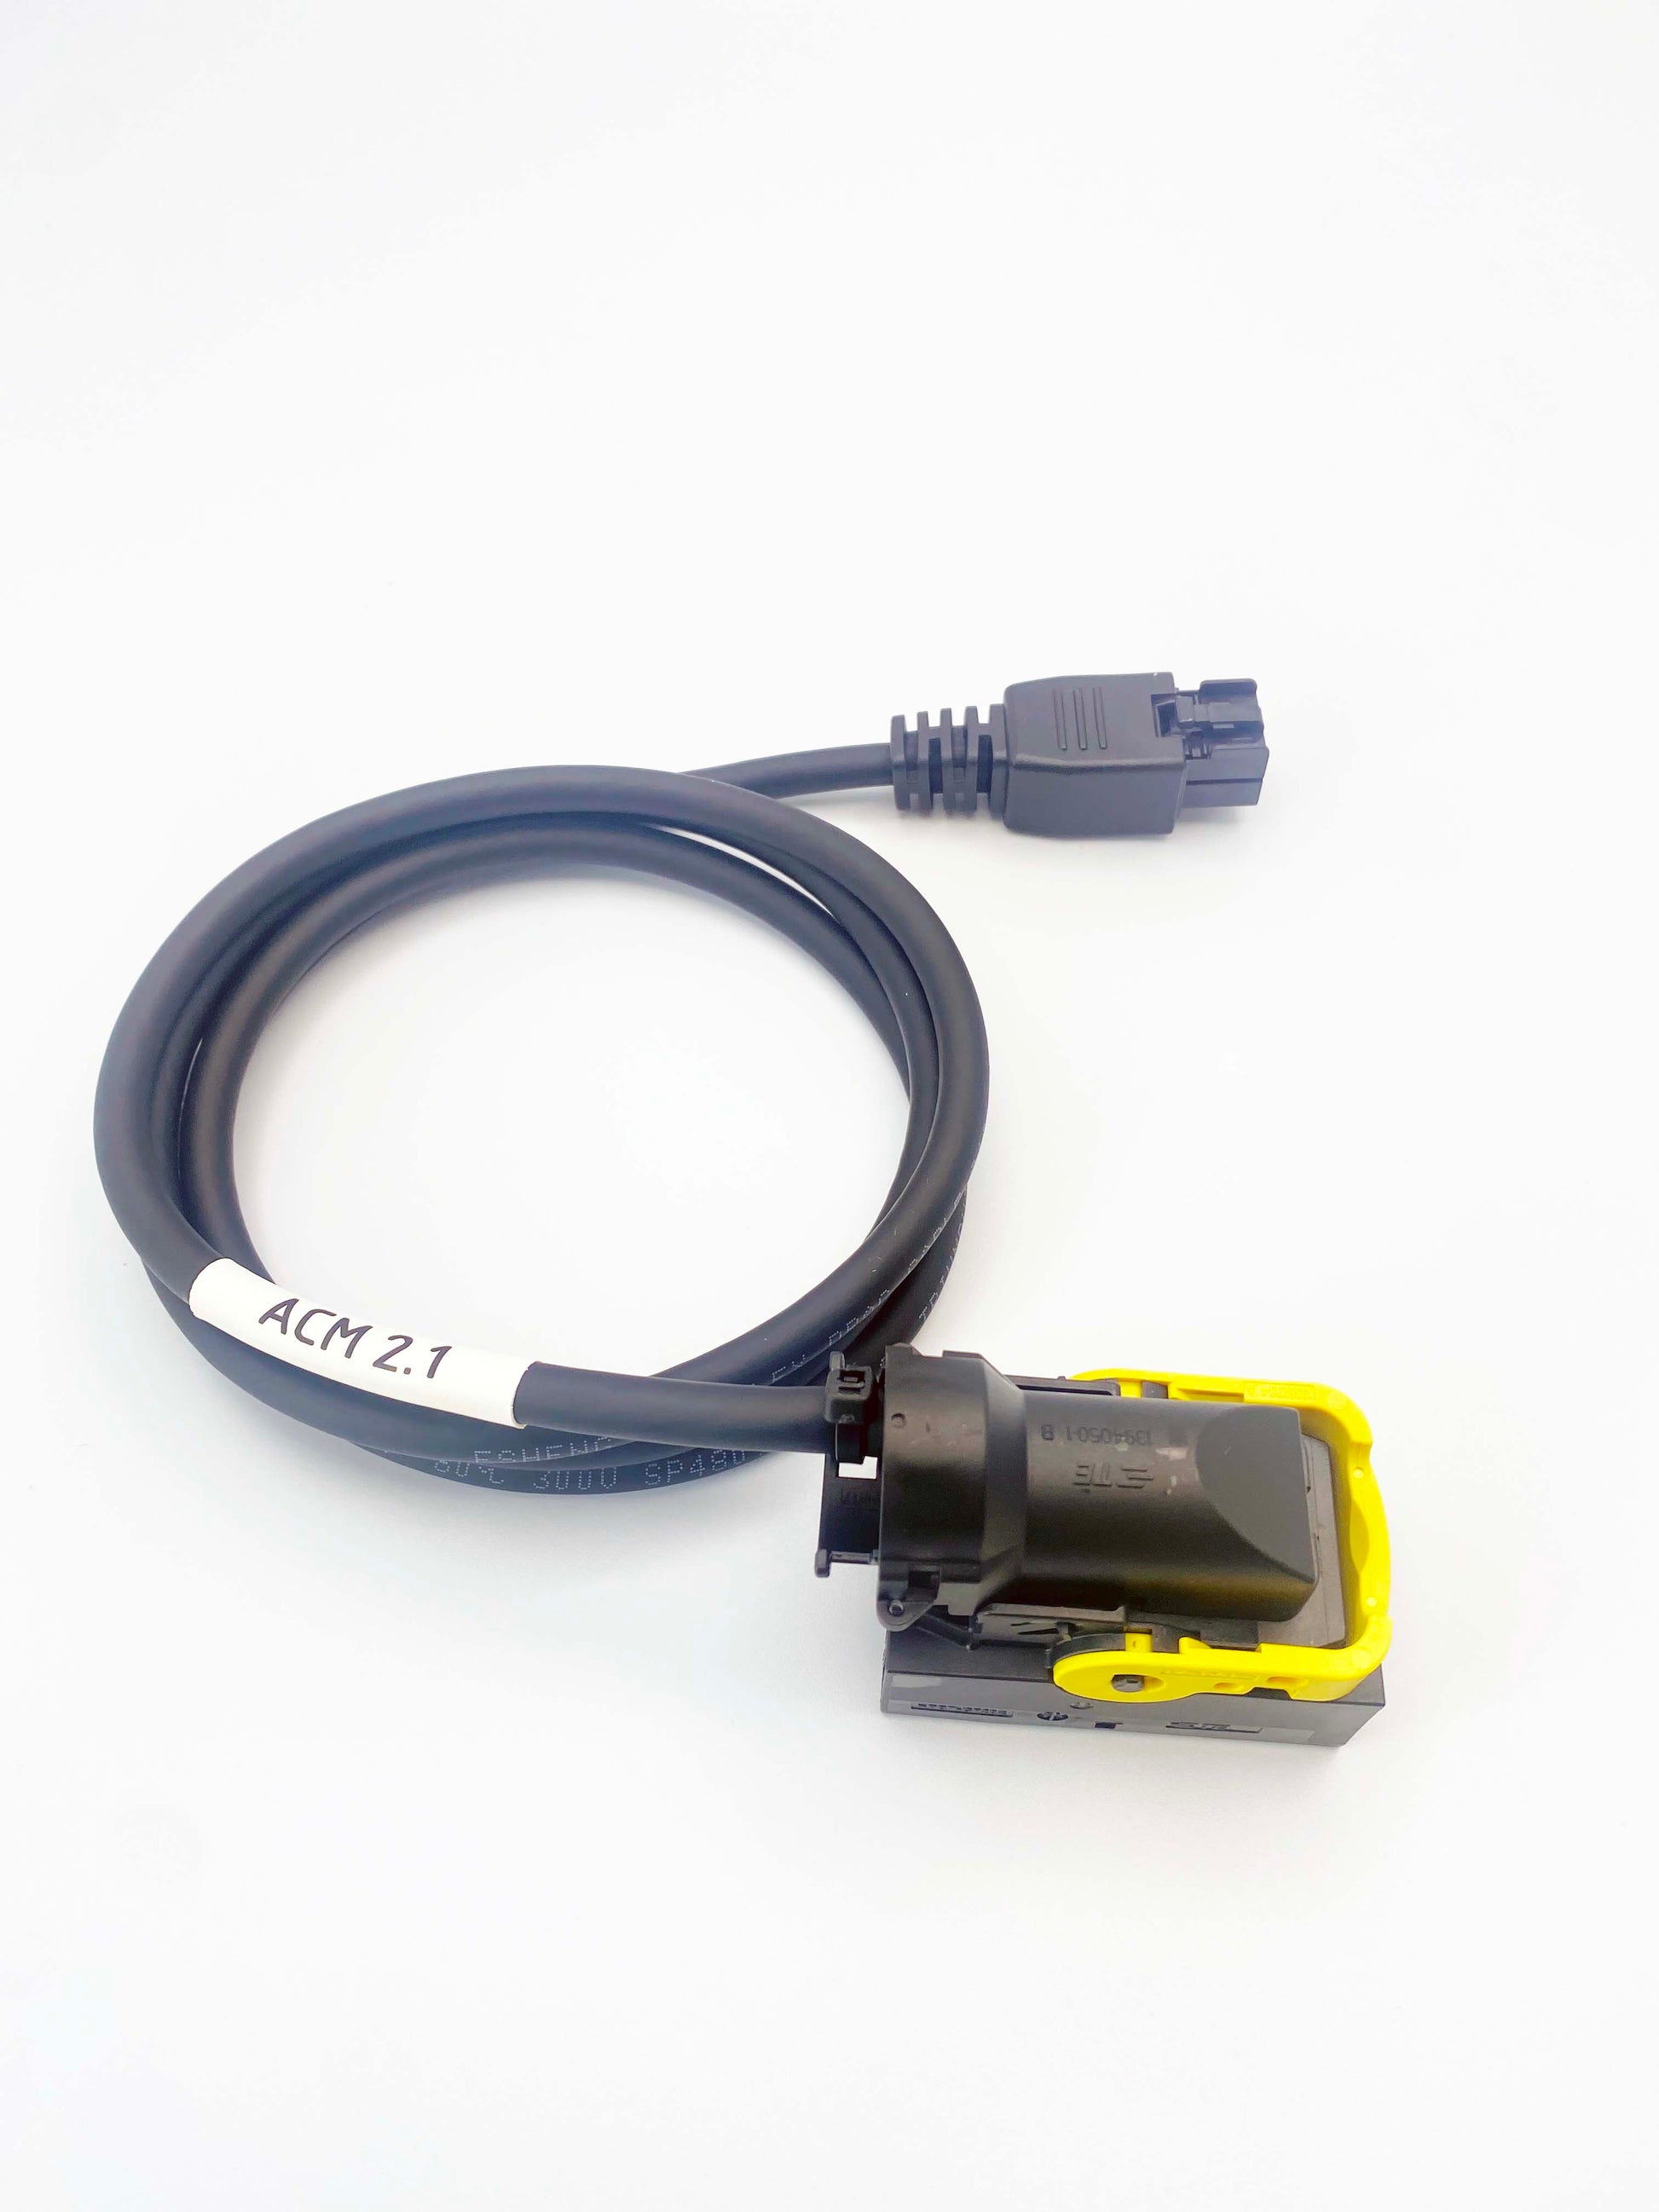 Cable Mercedes Truck Temic ACM2.1 Cable to establish a connection with Mercedes Truck equipped with Temic ACM2.1. ECUs. replacement Cable for 144300T117 / F34NTA20 made by COBD